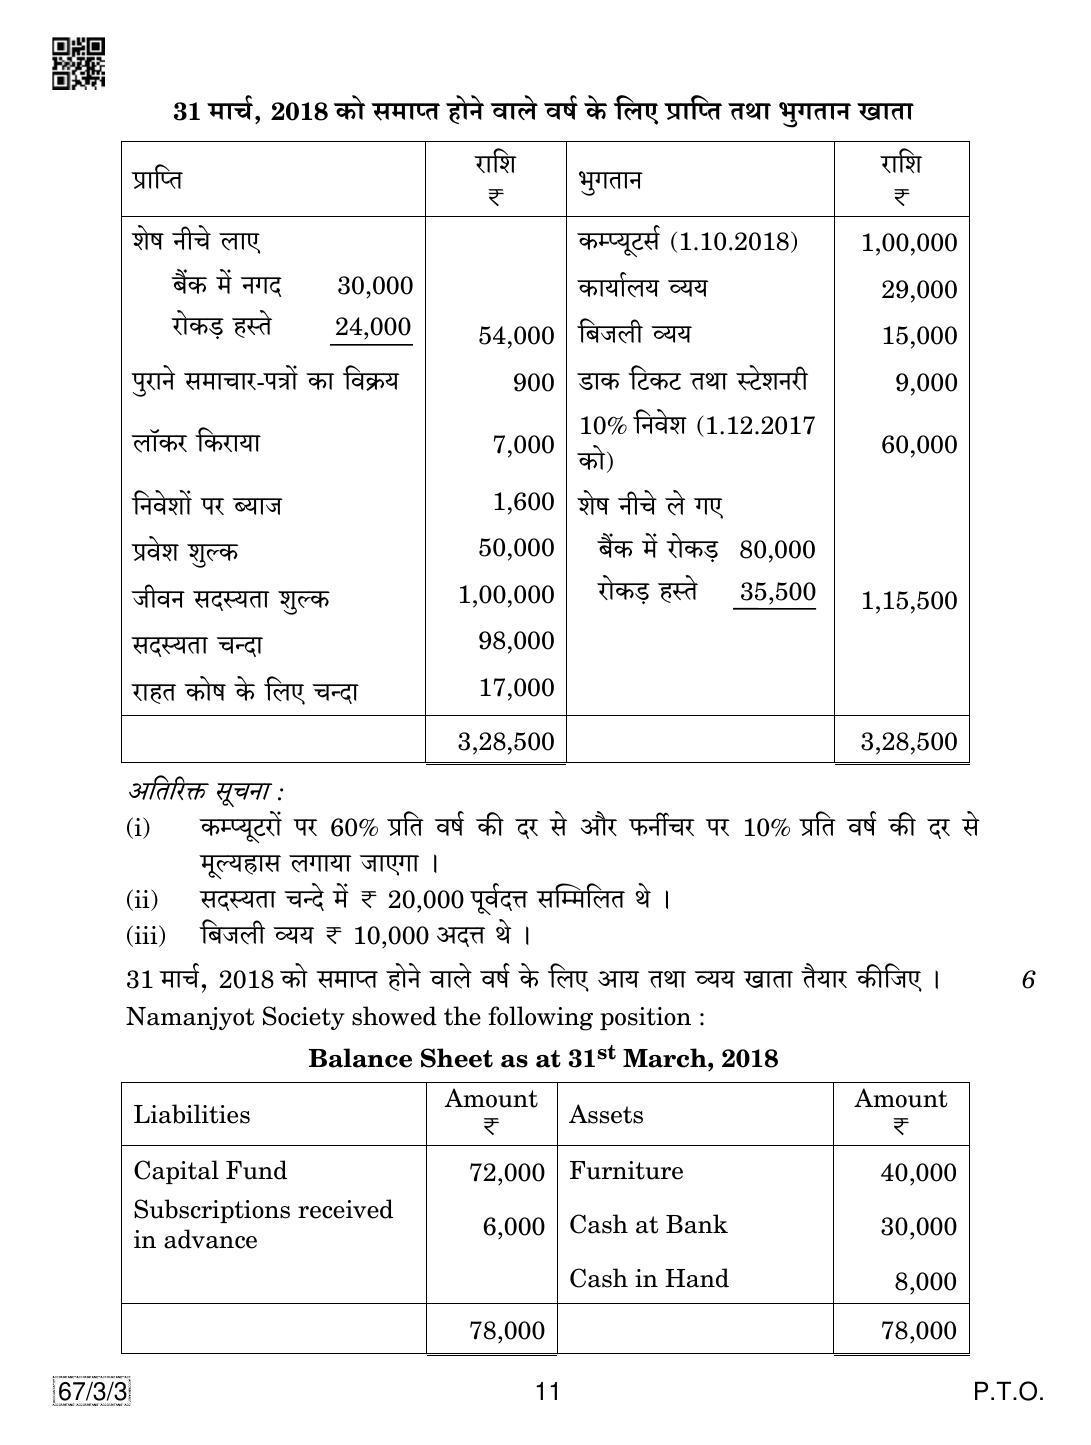 CBSE Class 12 67-3-3 Accountancy 2019 Question Paper - Page 11